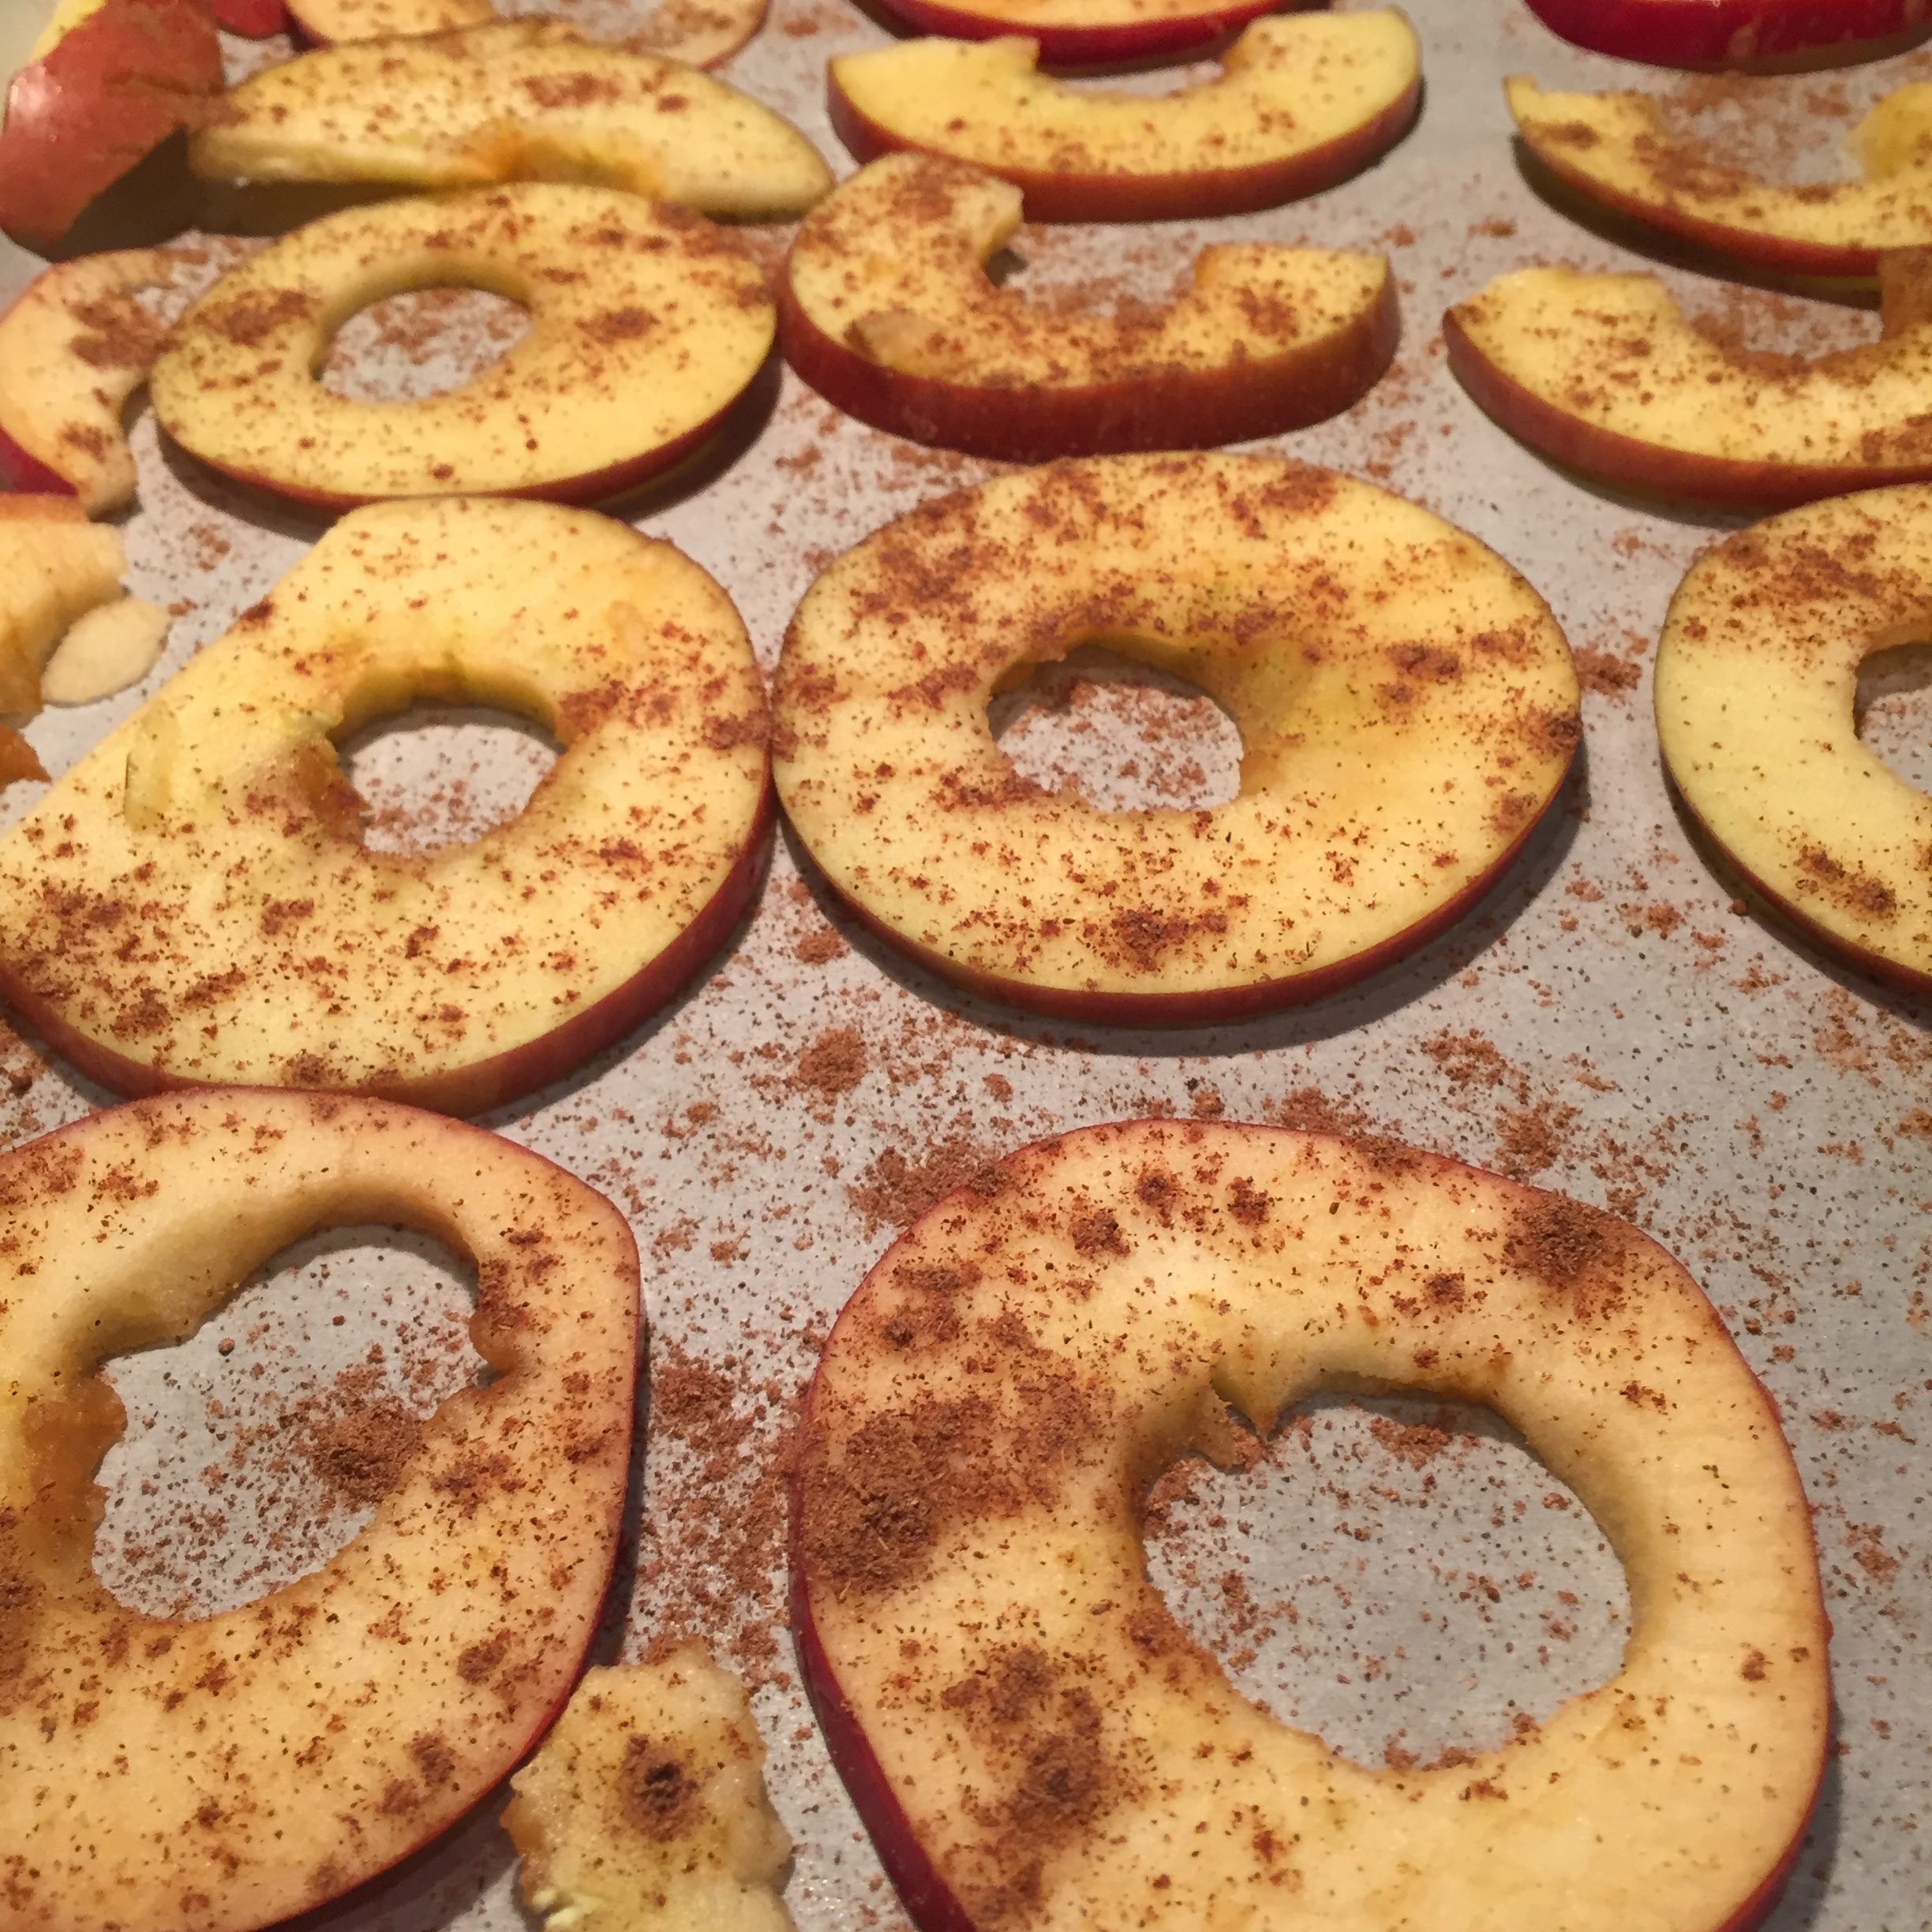 No need to sprinkle pumpkin spice on the apple slices on both sides. 